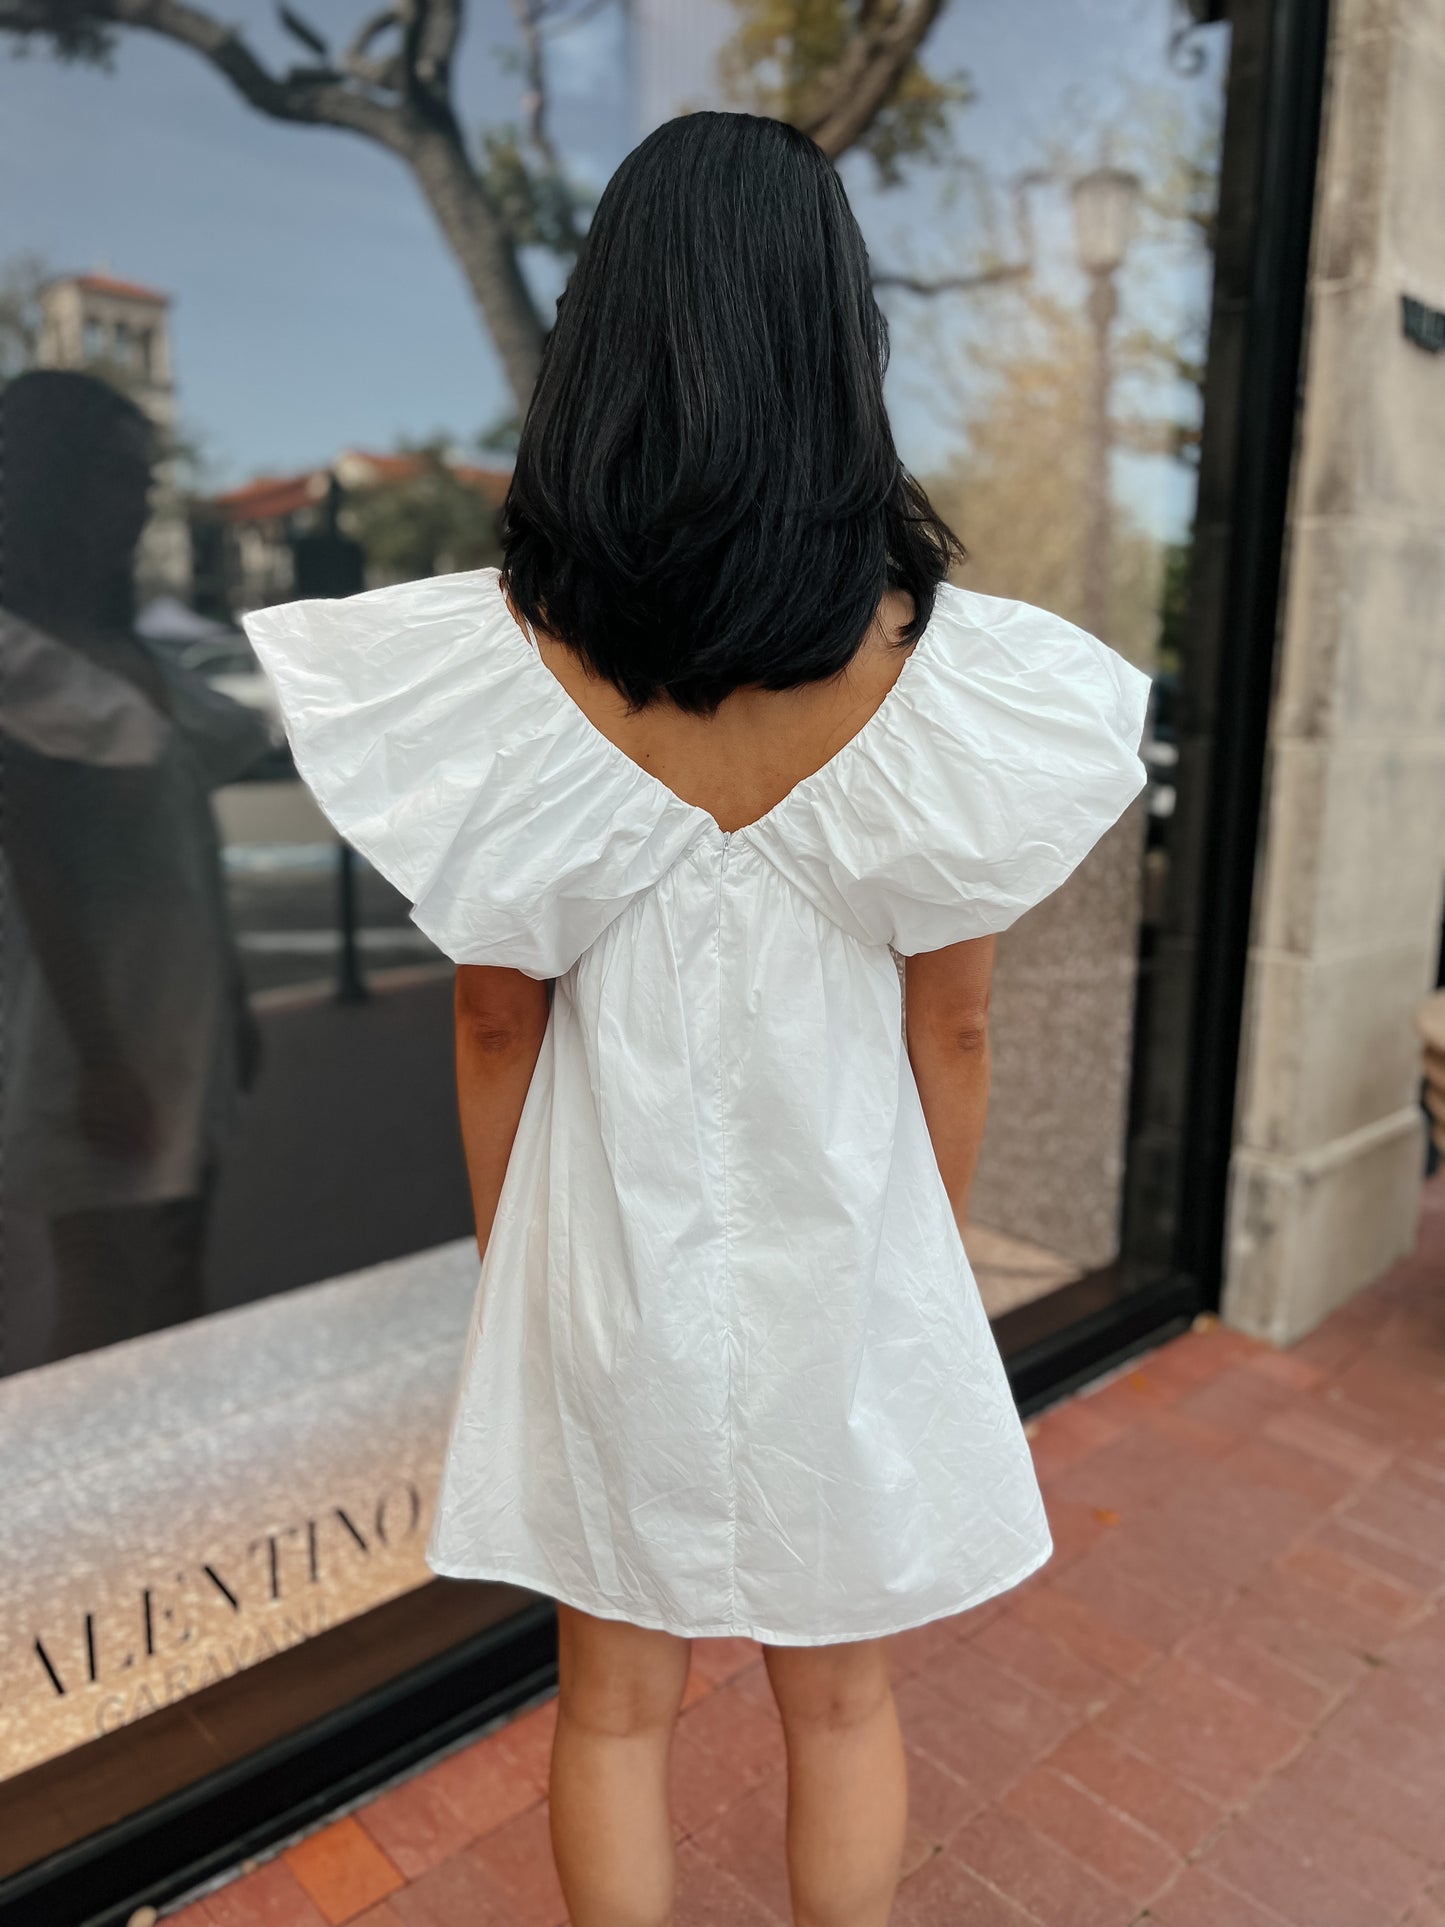 Every Bunny's Favorite White Dress